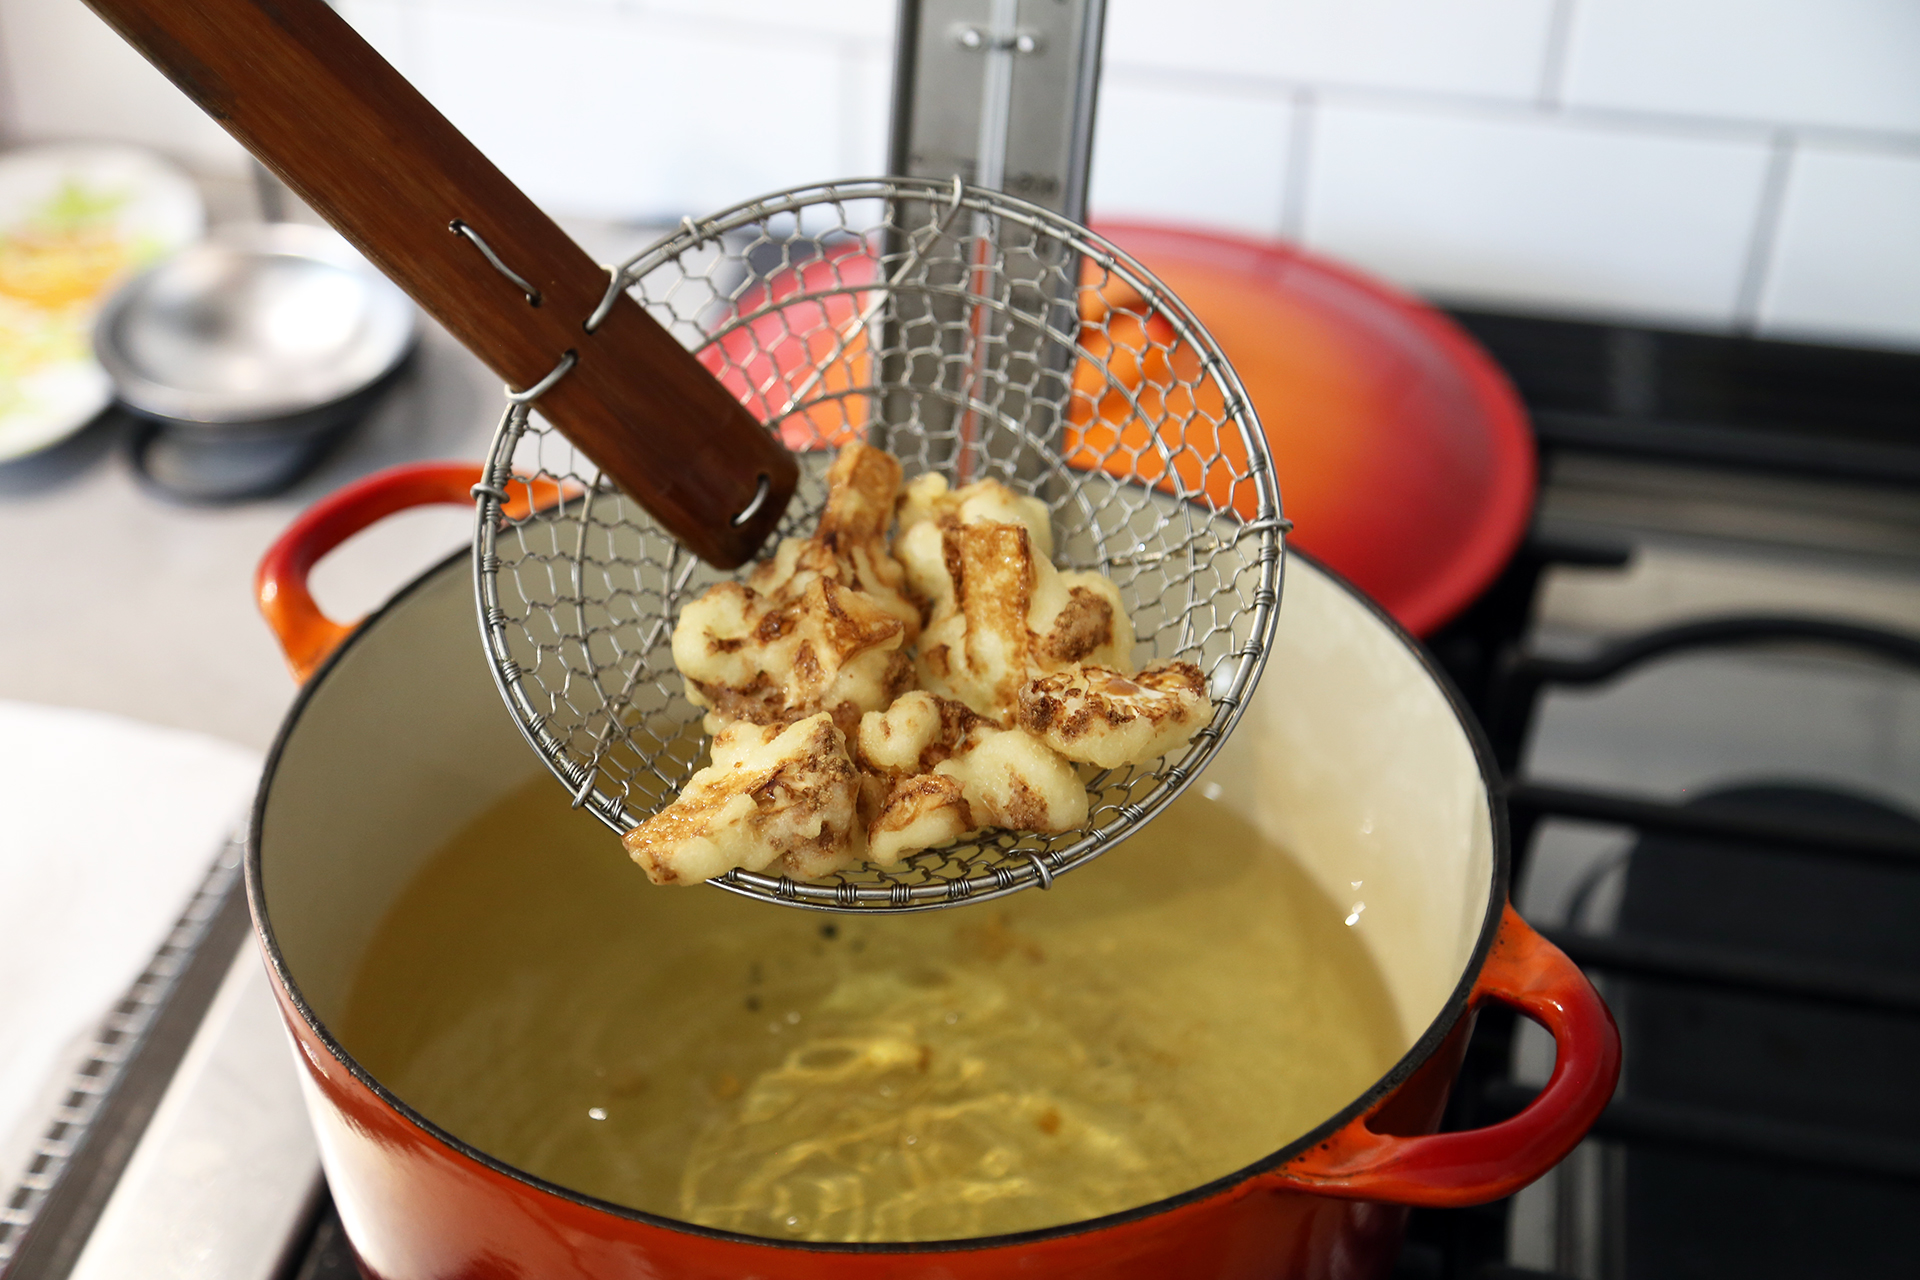 Fry the cauliflower, turning gently and occasionally with the spider, slotted spoon or tongs, until golden brown and crispy and the cauliflower is tender, about 6 minutes.